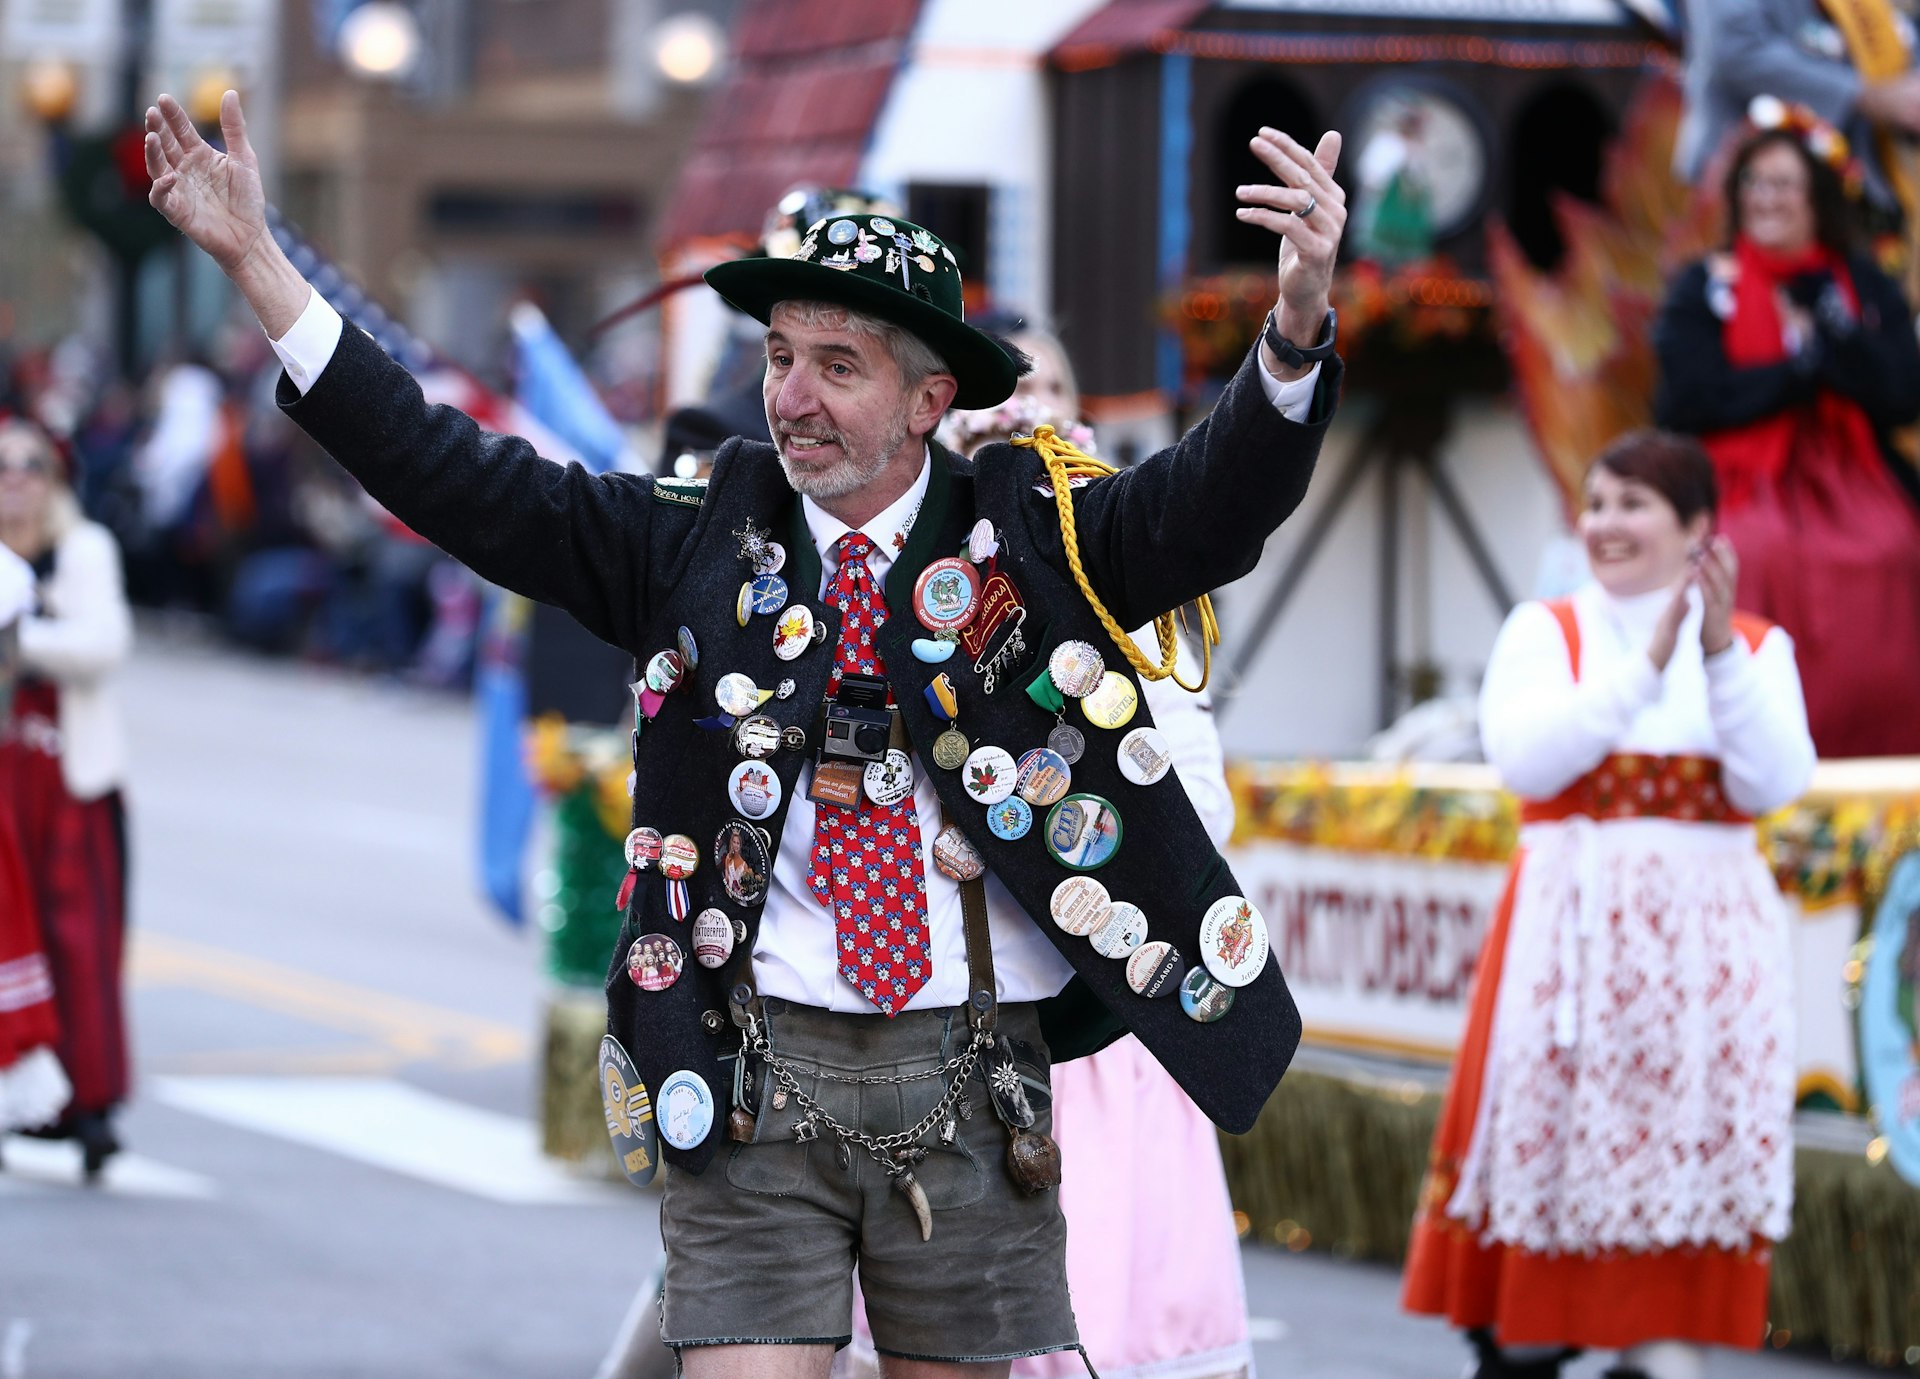 A man covered in buttons and badges raises his arms during a Thanksgiving Day parade